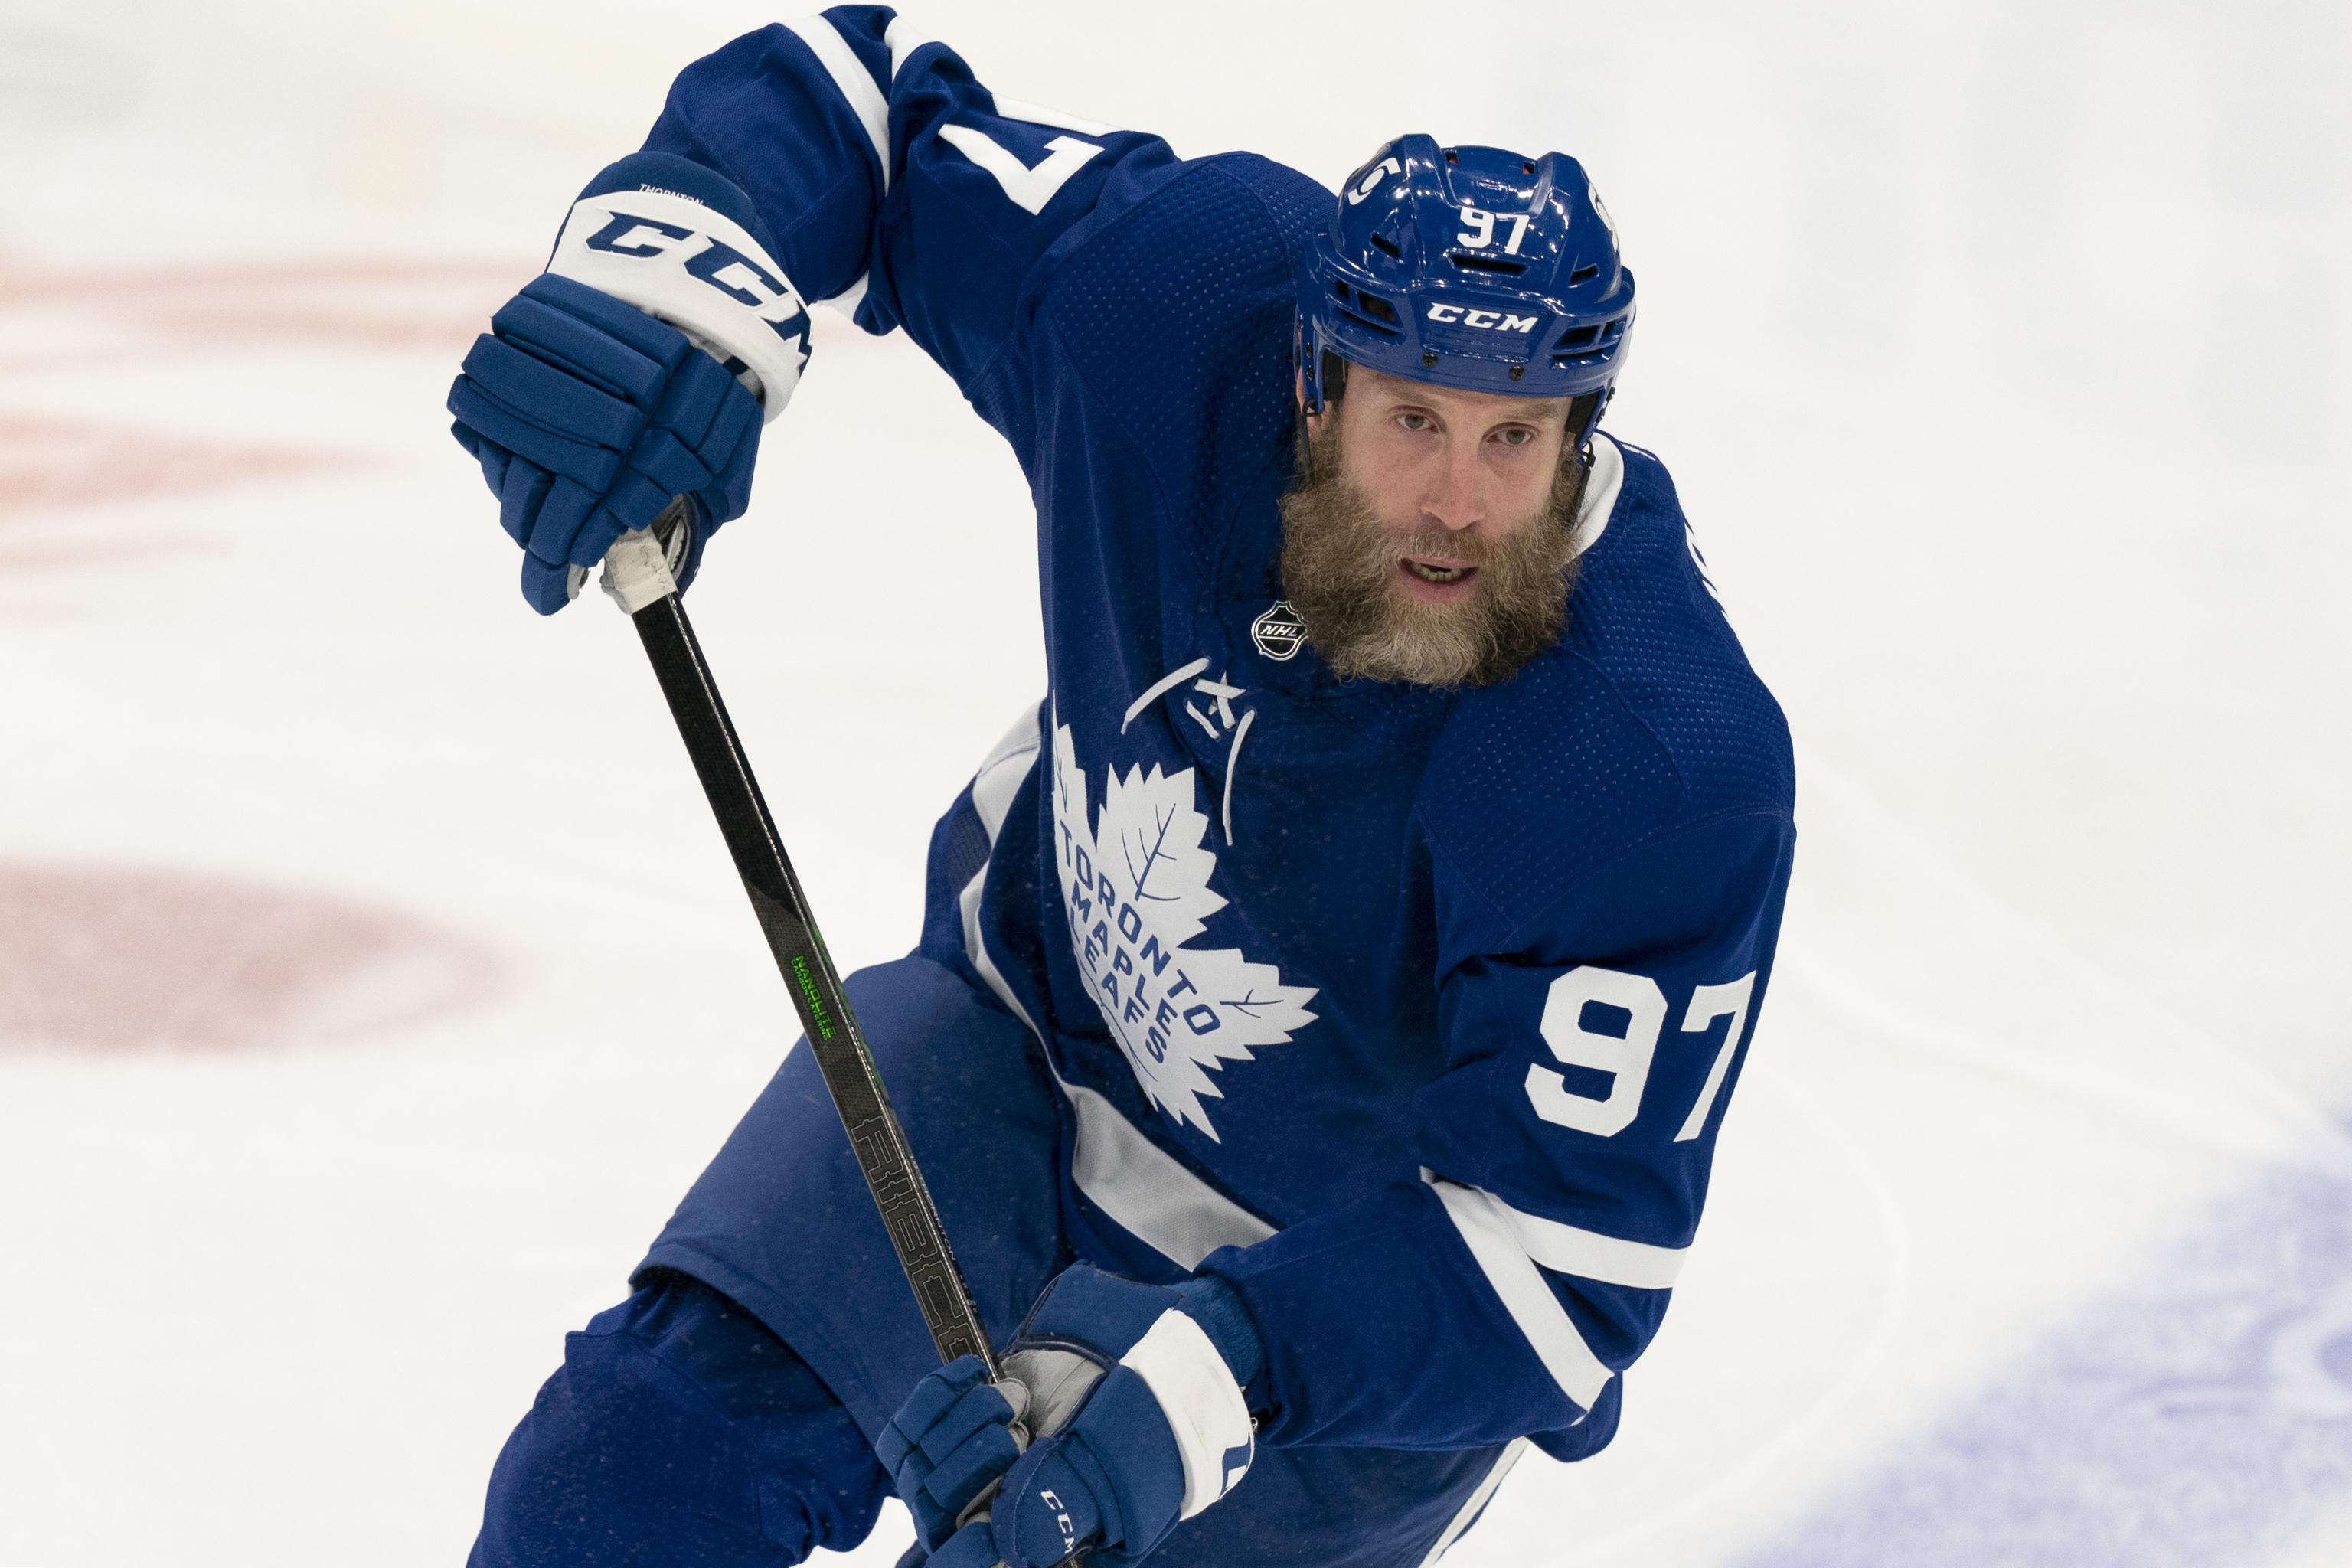 Florida Panthers sign forward Joe Thornton to a 1-year contract